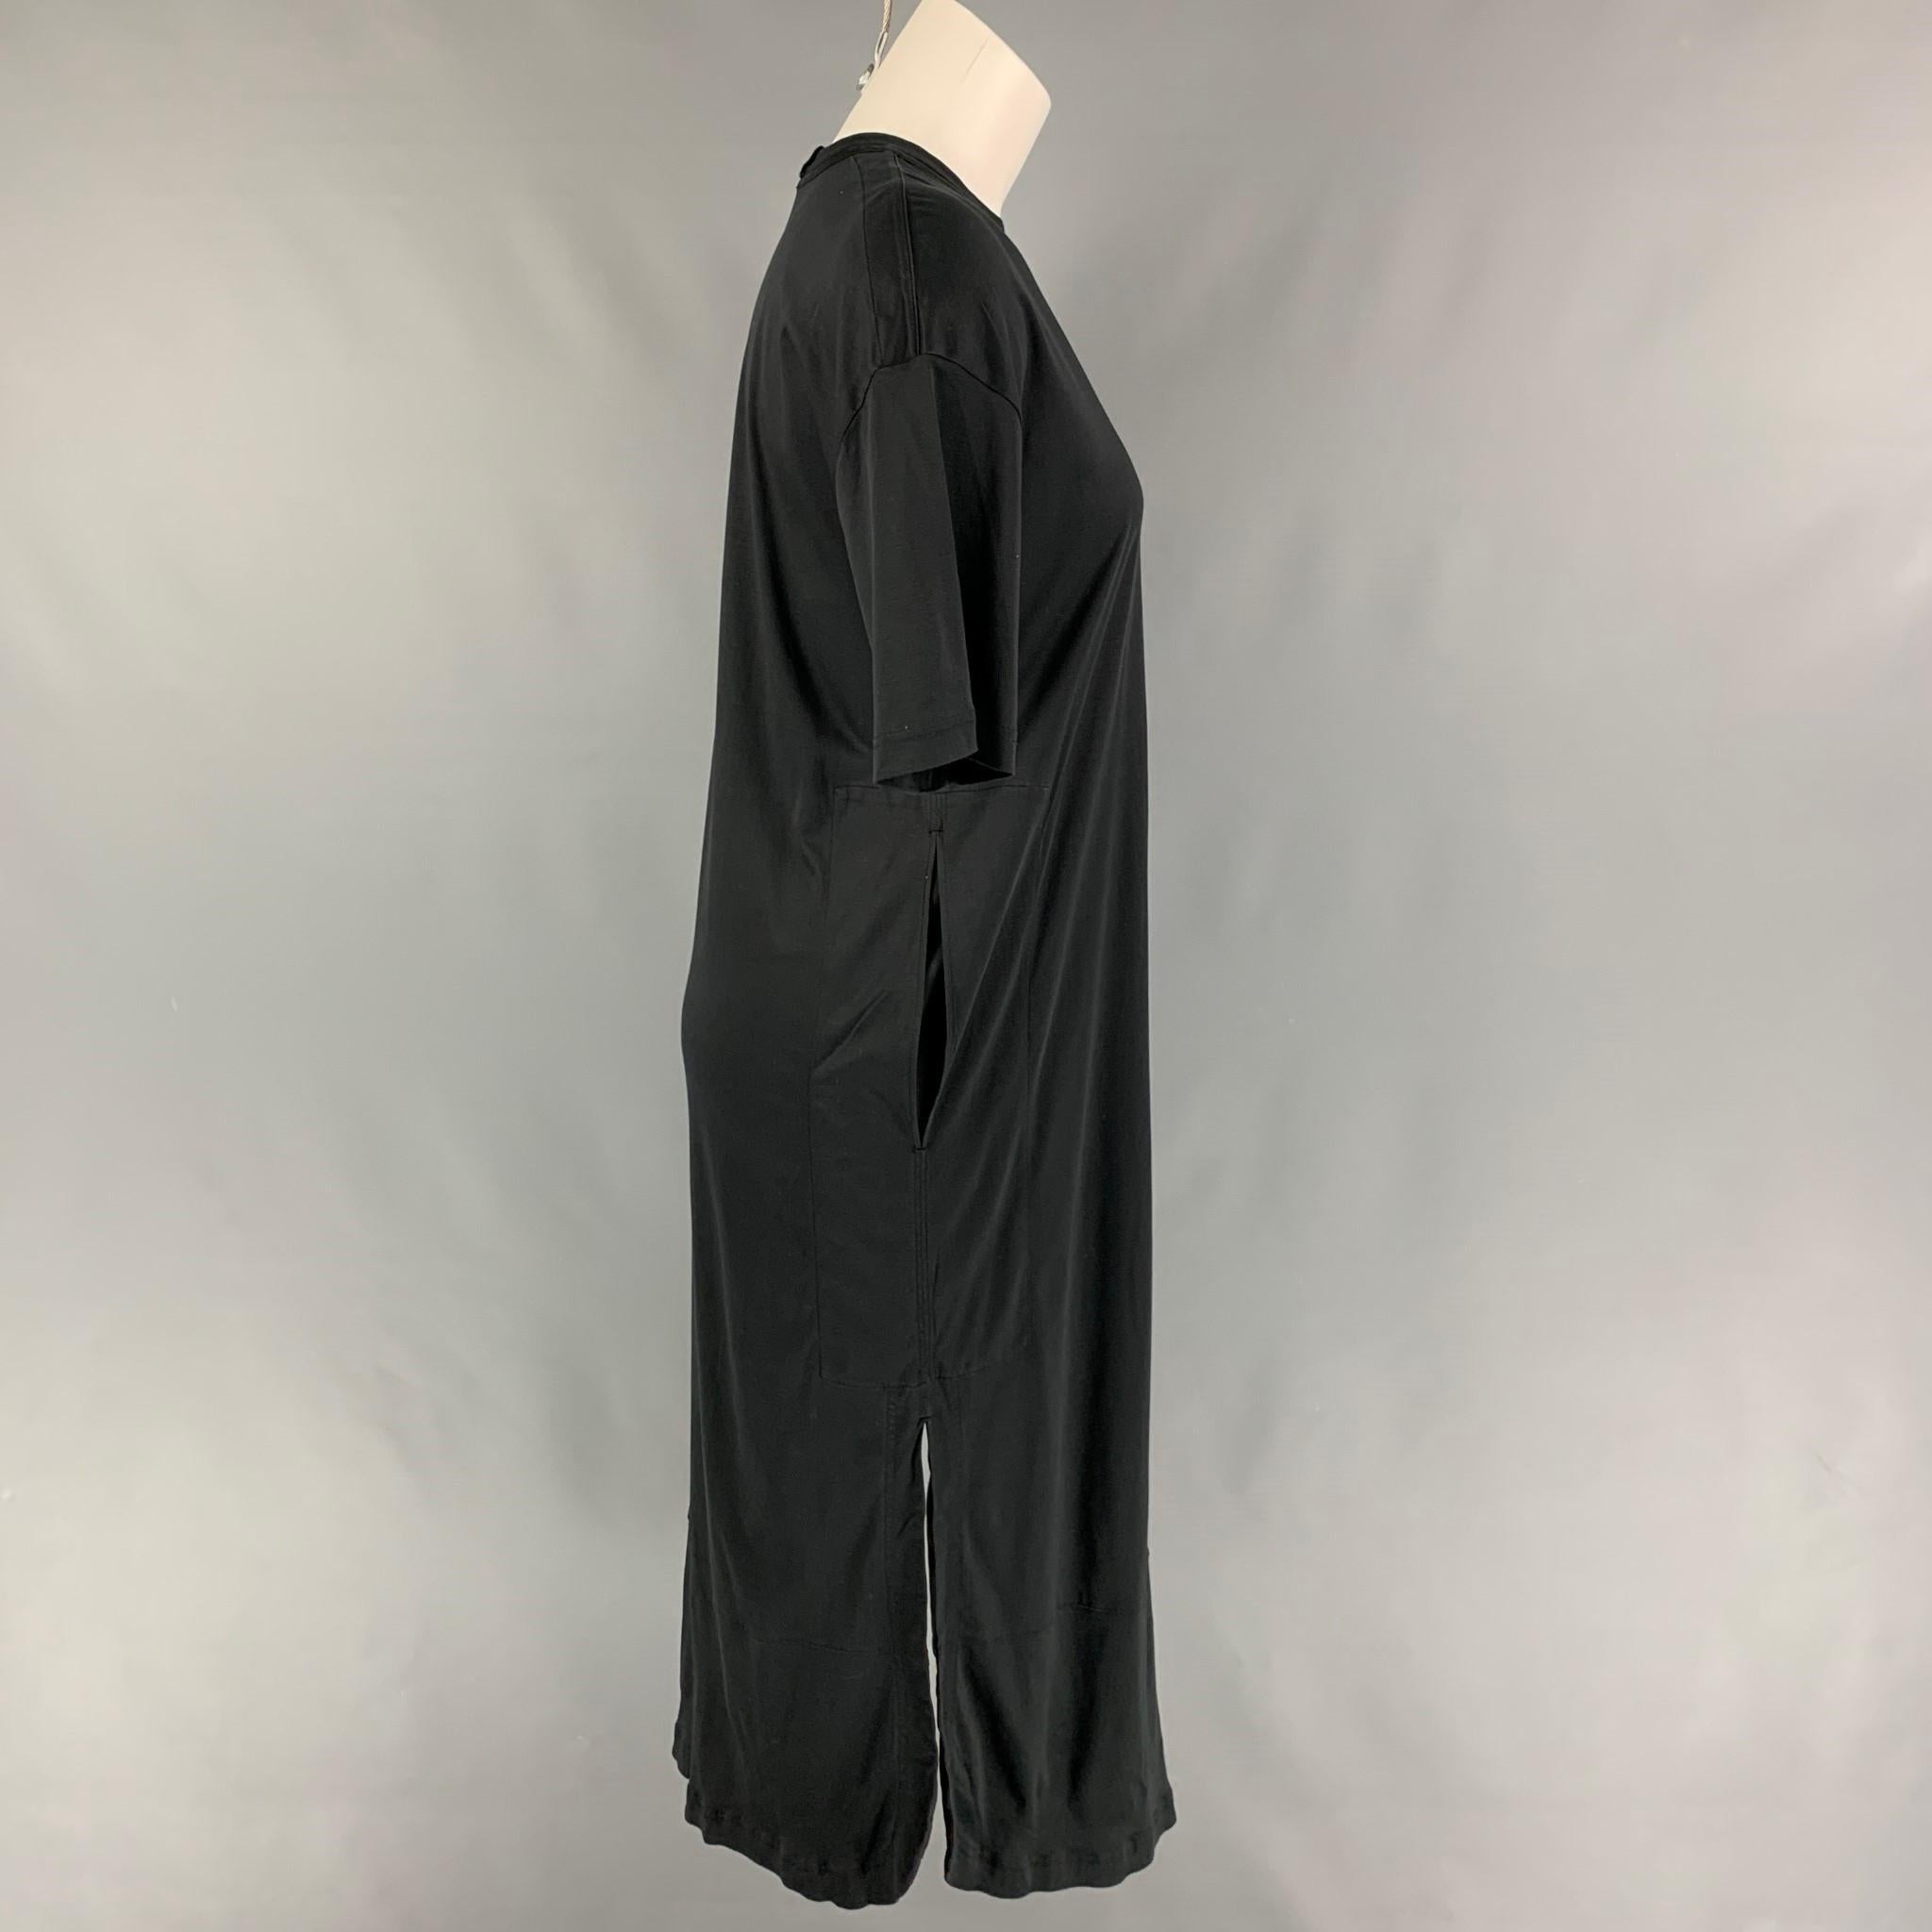 HELMUT LANG dress comes in a black material featuring side slits, crew-neck, and slit pockets. 

Very Good Pre-Owned Condition. Fabric tag removed.
Marked: Size tag removed.

Measurements:

Shoulder: 20 in.
Bust: 36 in.
Sleeve: 8.5 in.
Length: 45